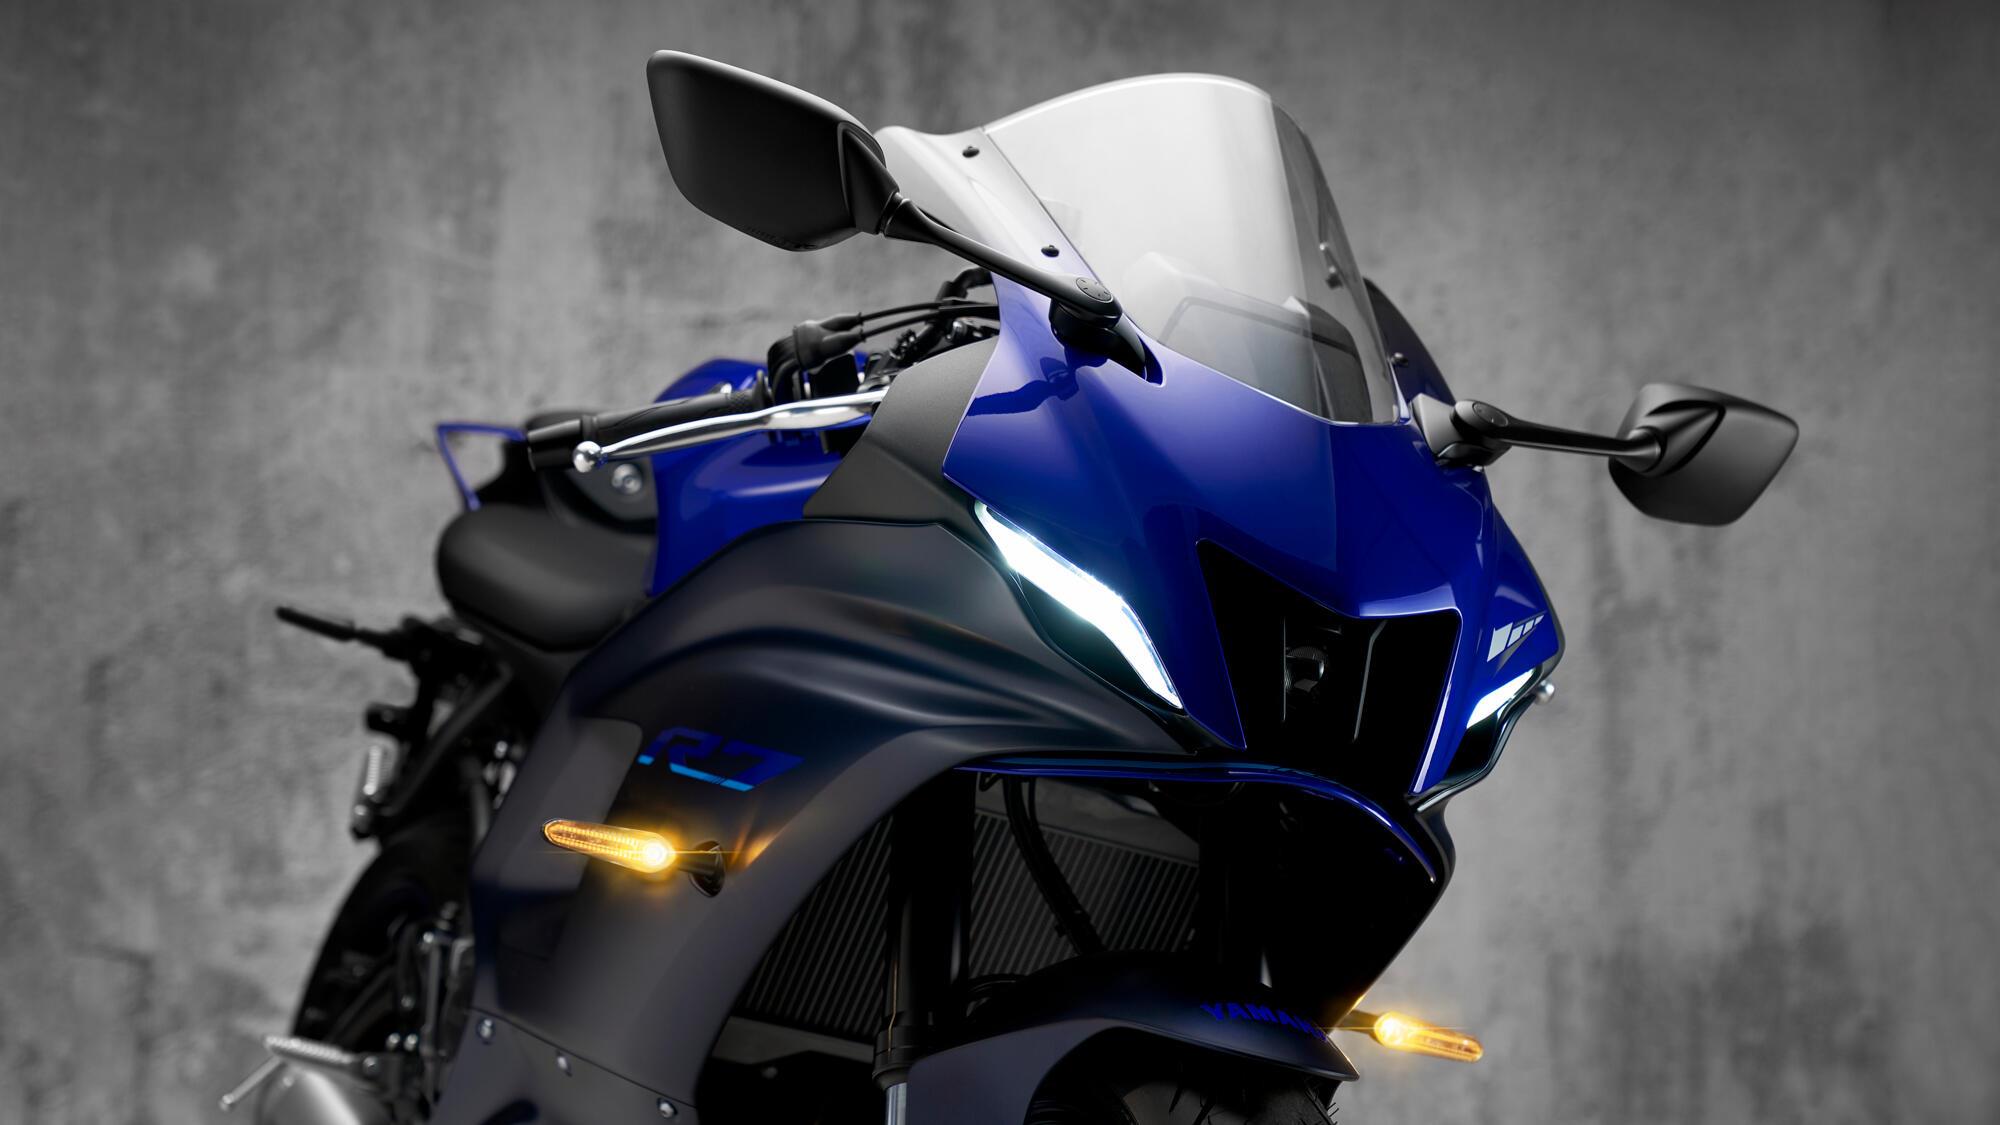 2023 Yamaha R7 Specifications and Expected Price in India